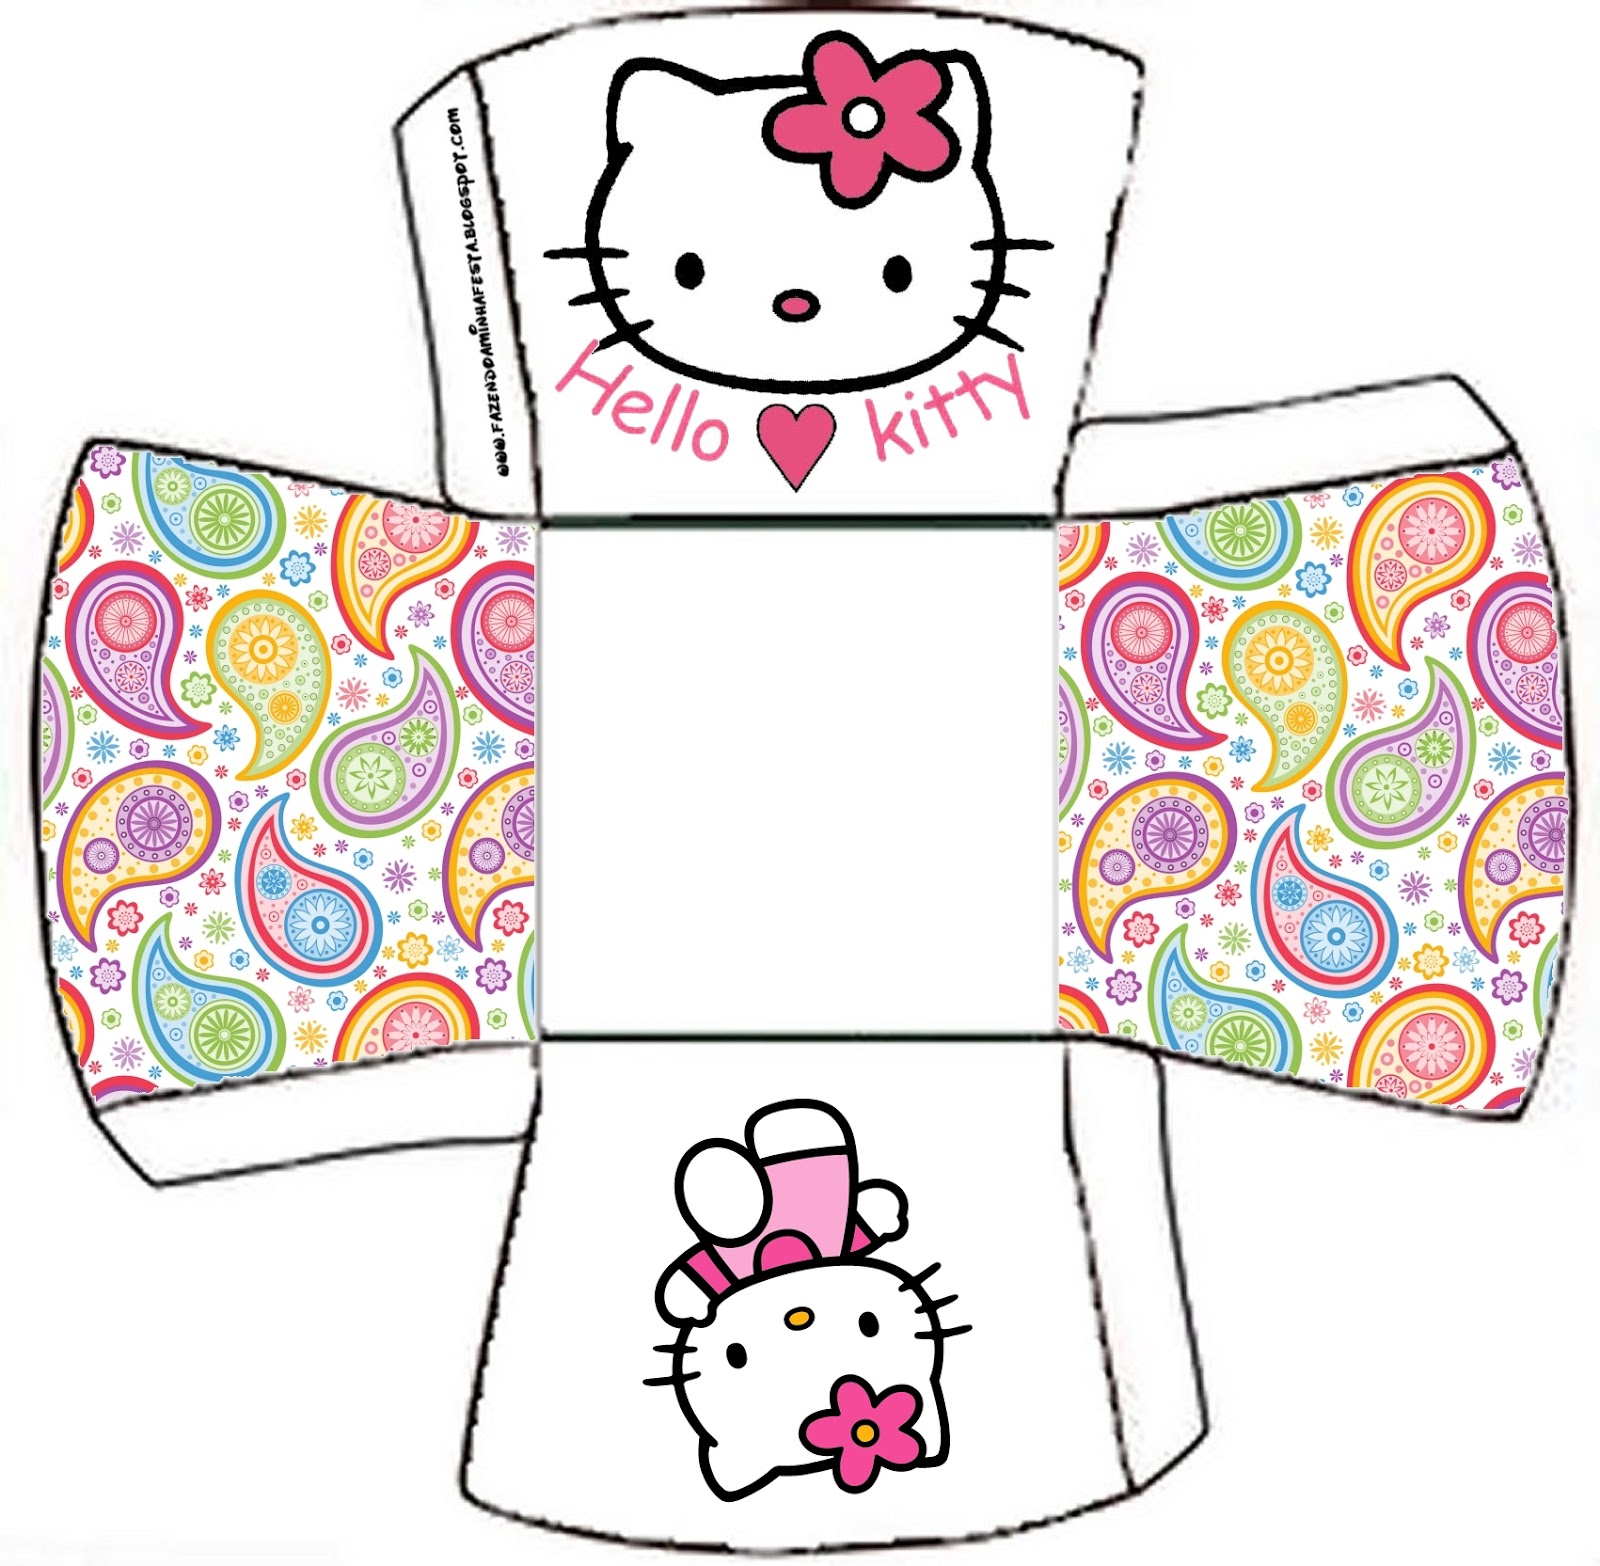 hello-kitty-free-printable-boxes-oh-my-fiesta-in-english